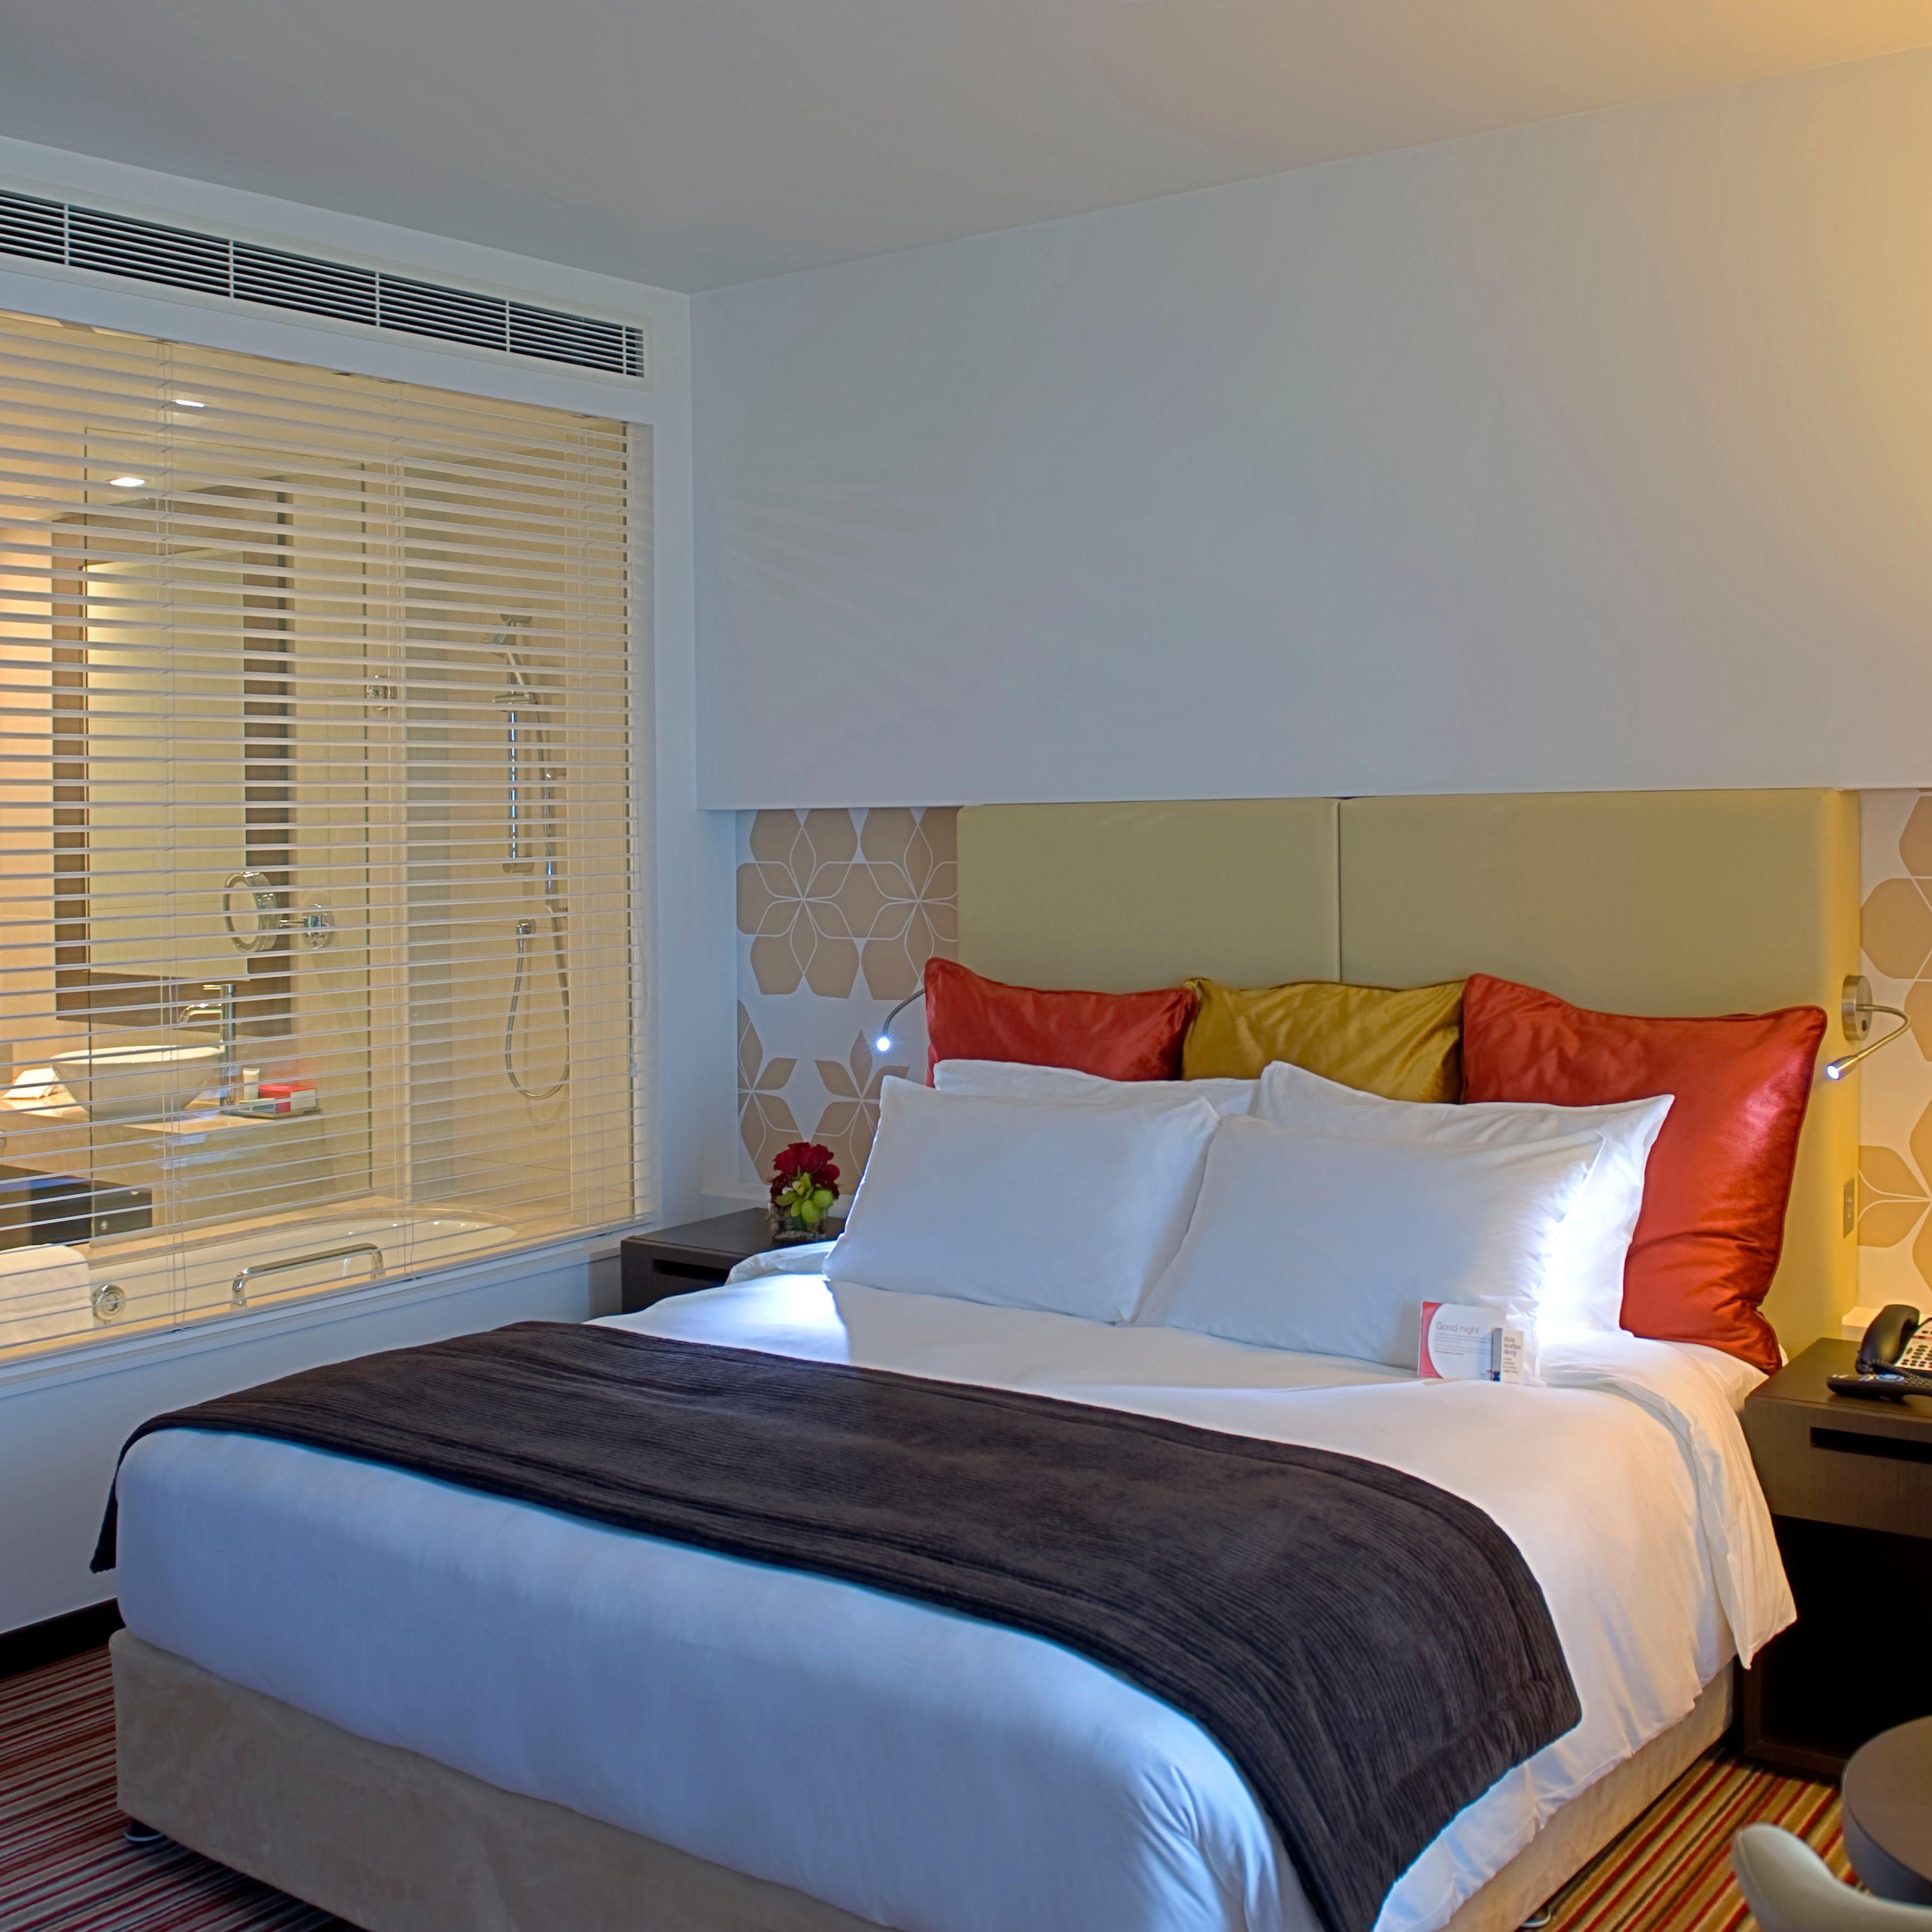 Have a quiet sleep and relaxing stay at our Superior Room